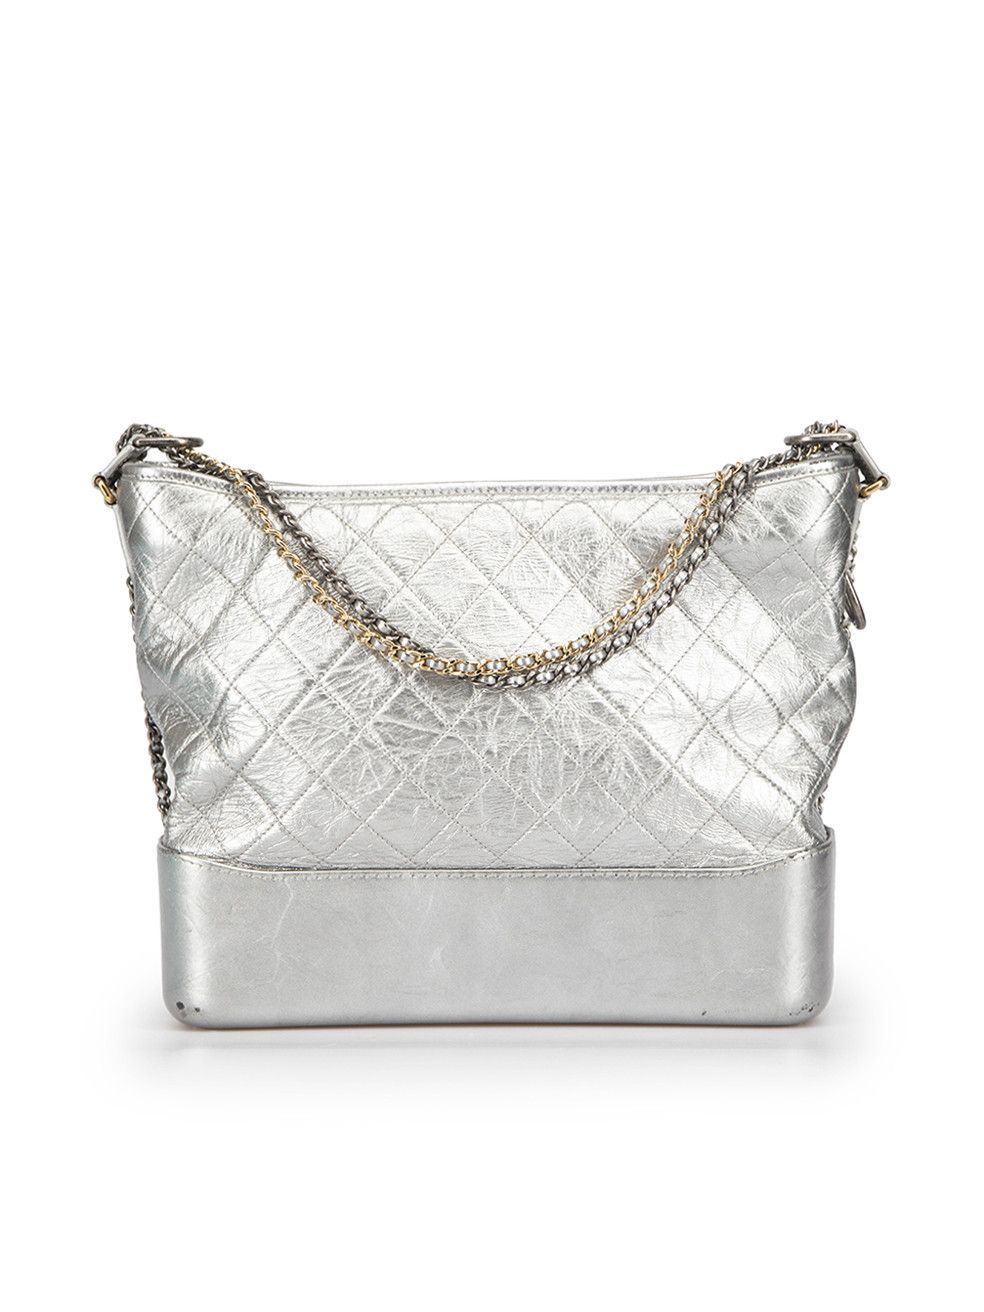 CHANEL 2018 Gabrielle Hobo bag in silver leather with …